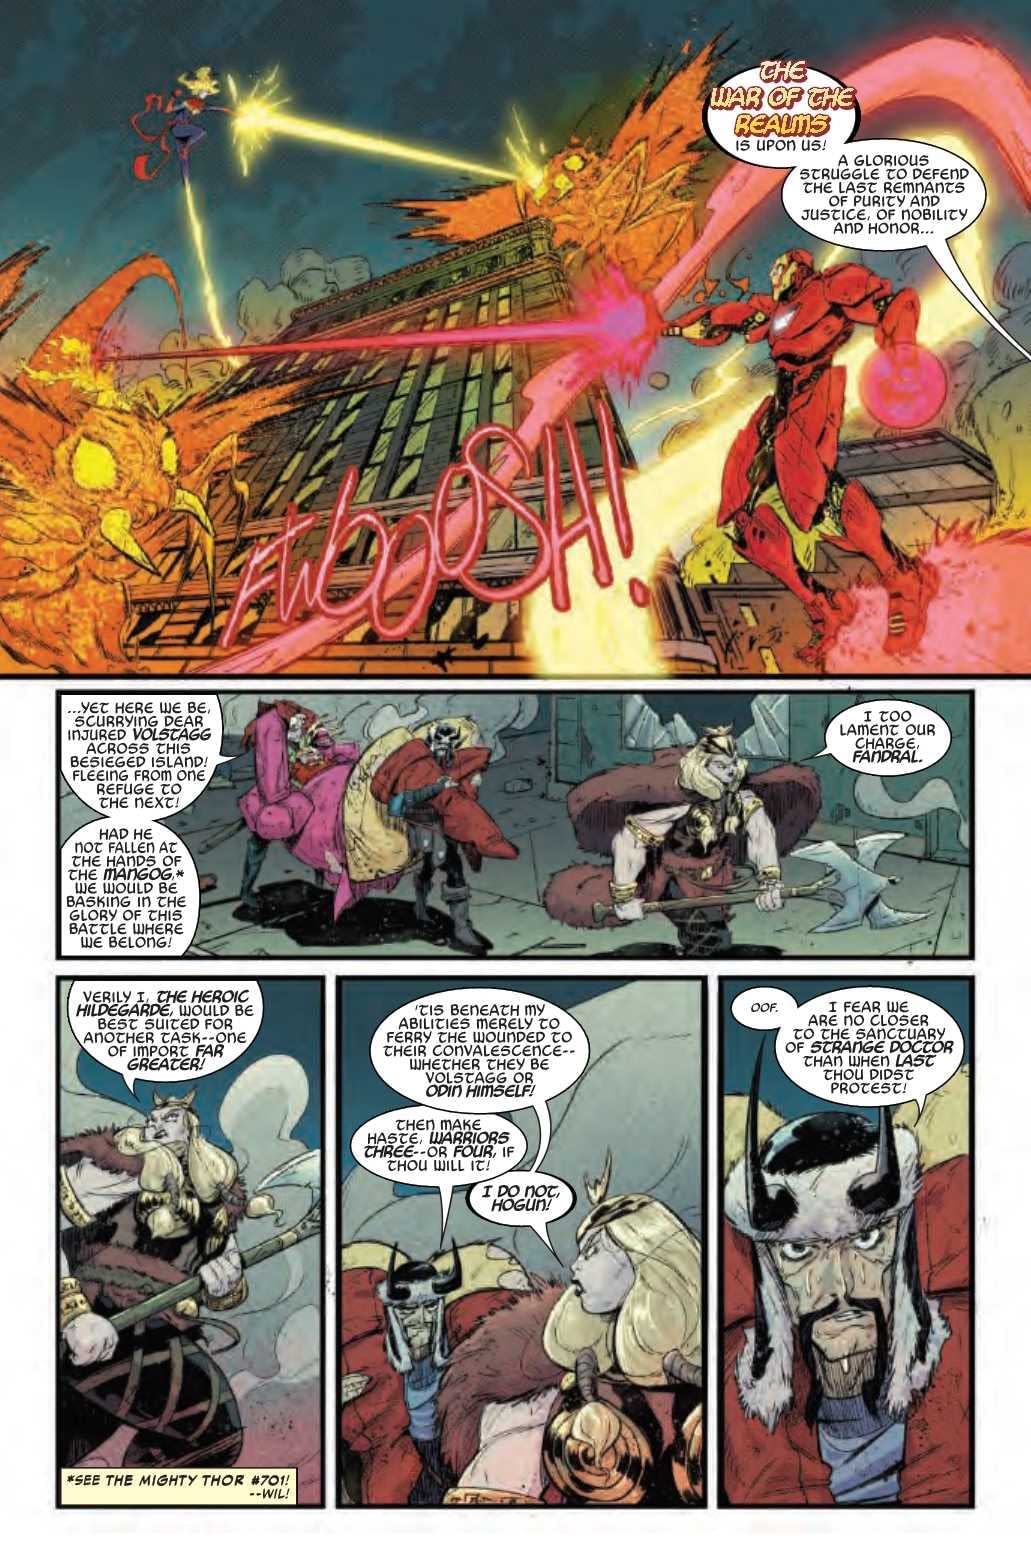 Marvel Makes a Major Change to Howard the Duck in War of the Realms: War Scrolls #1 (Preview)